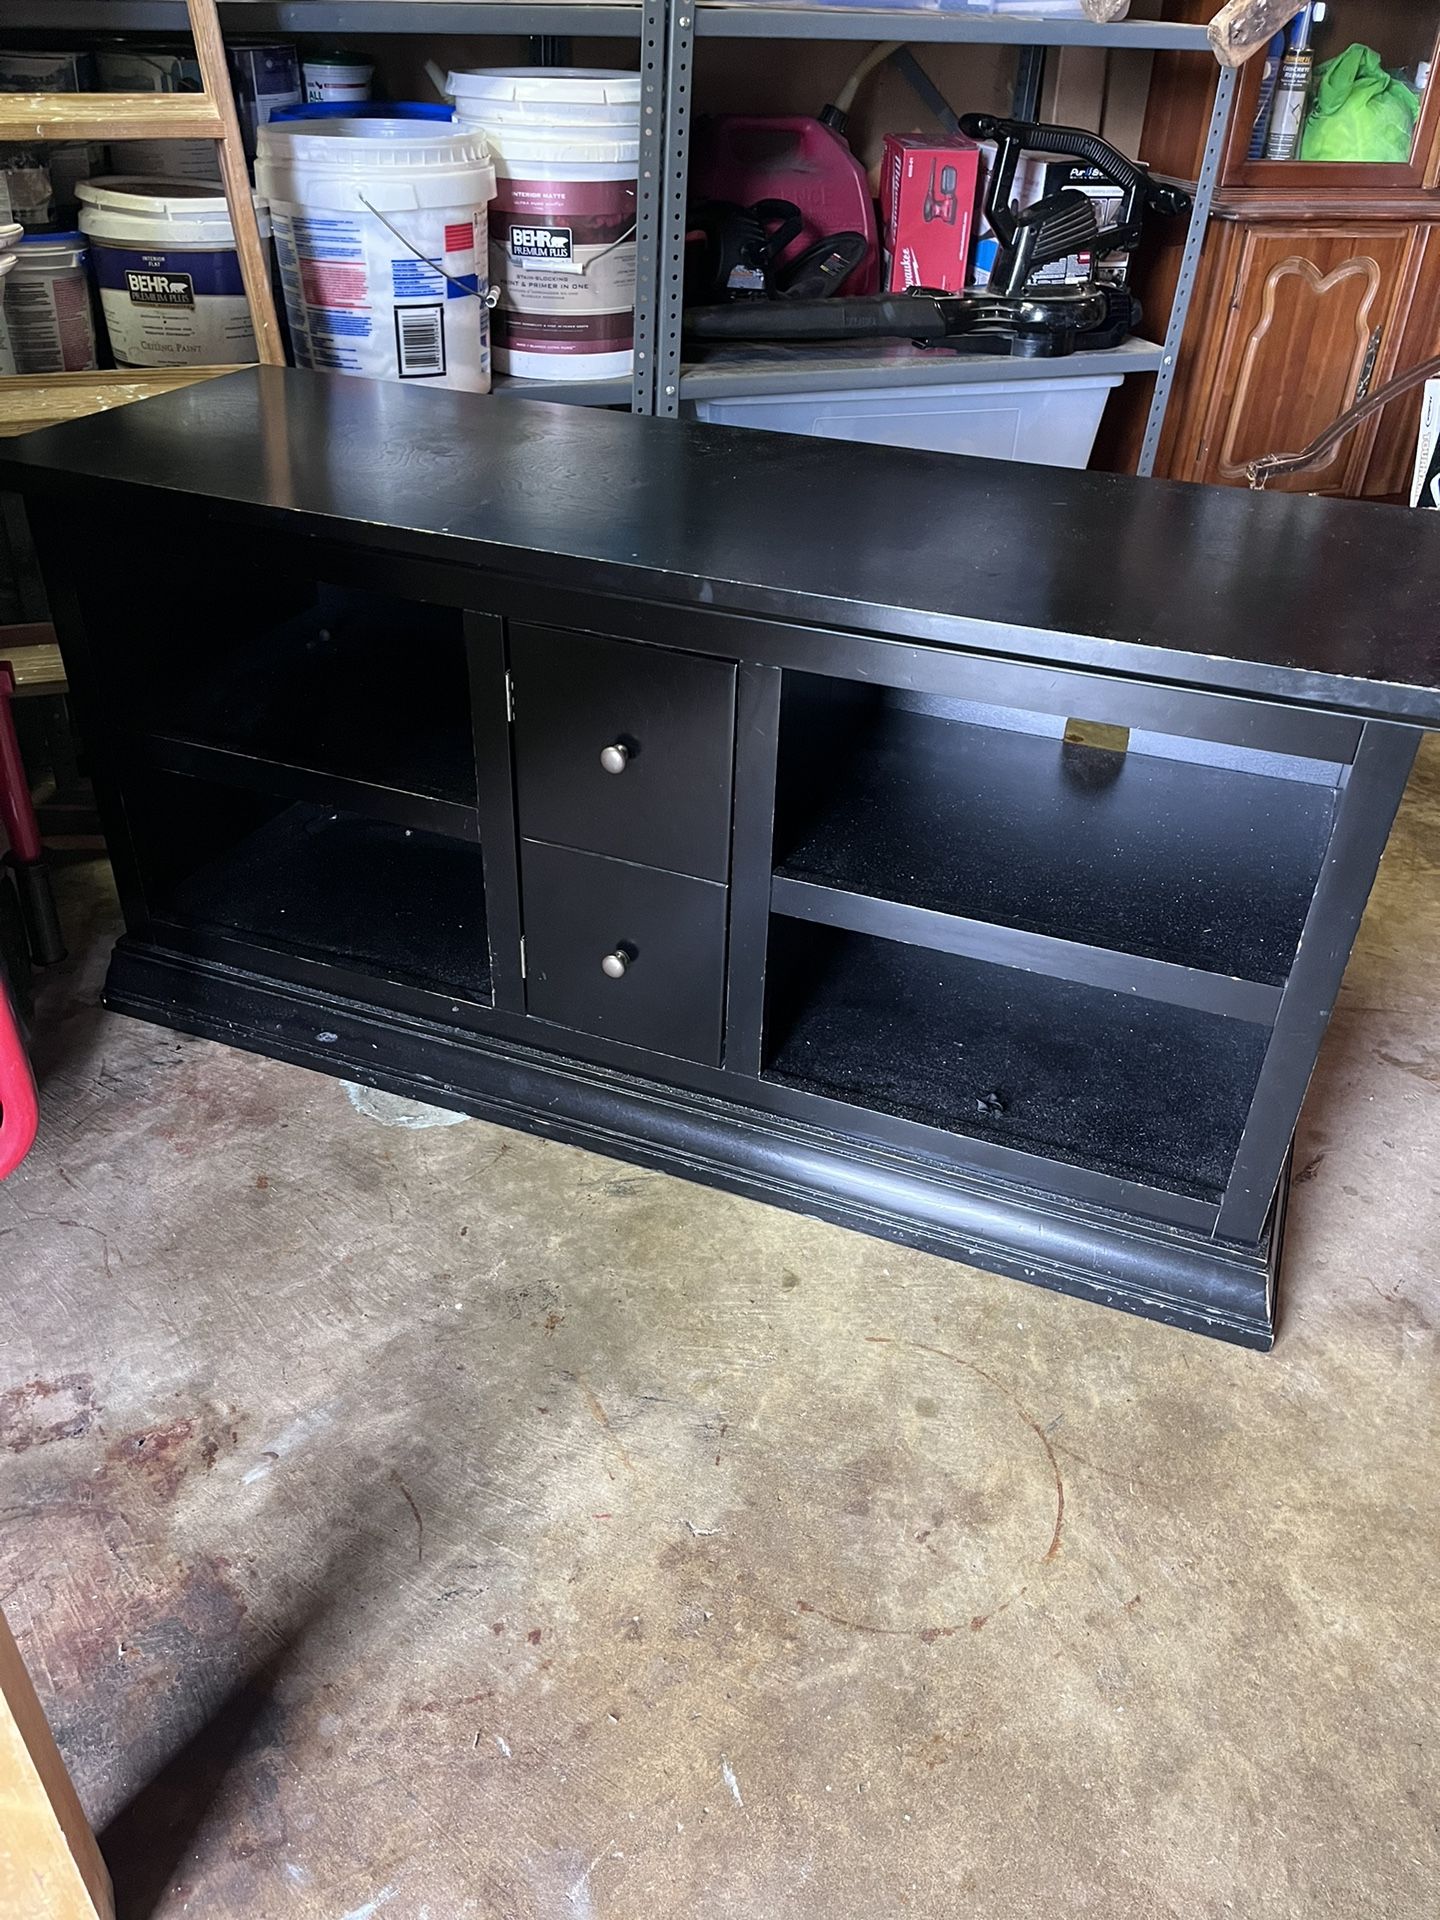 Tv Console Table